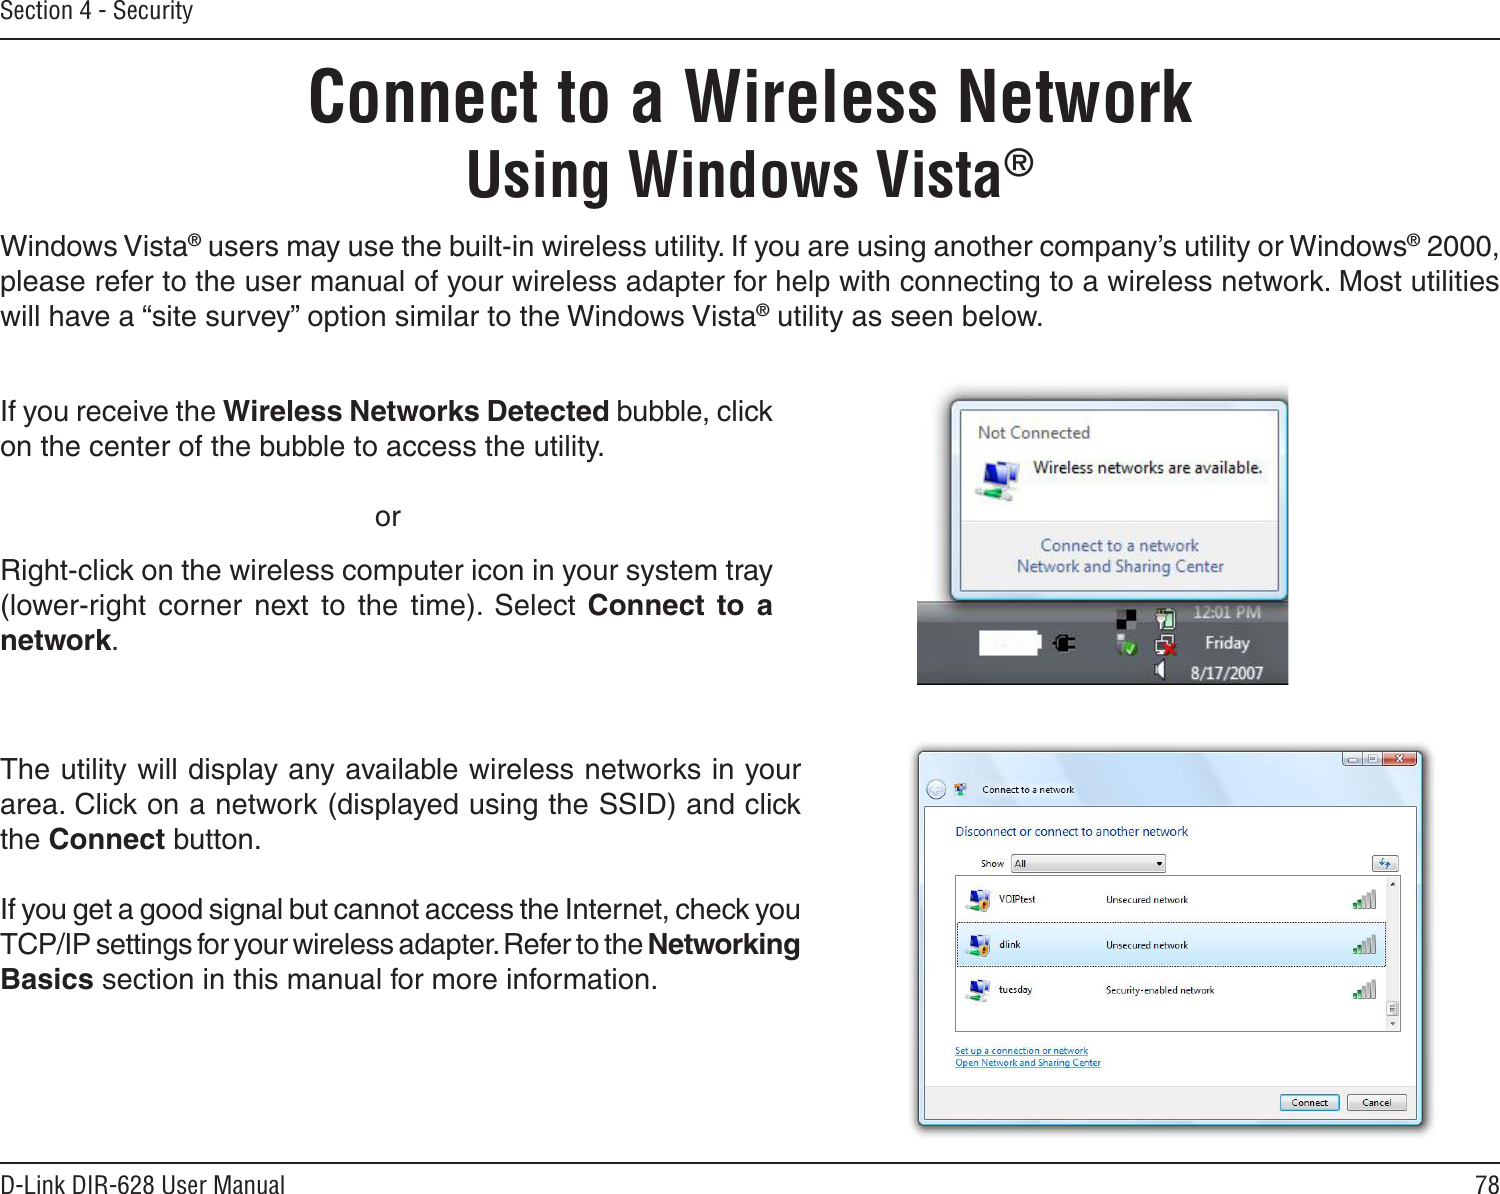 78D-Link DIR-628 User ManualSection 4 - SecurityConnect to a Wireless NetworkUsing Windows Vista®Windows Vista® users may use the built-in wireless utility. If you are using another company’s utility or Windows® 2000, please refer to the user manual of your wireless adapter for help with connecting to a wireless network. Most utilities will have a “site survey” option similar to the Windows Vista® utility as seen below.Right-click on the wireless computer icon in your system tray (lower-right  corner  next  to  the  time).  Select  Connect  to  a network.If you receive the Wireless Networks Detected bubble, click on the center of the bubble to access the utility.     orThe utility will display any available wireless networks in your area. Click on a network (displayed using the SSID) and click the Connect button.If you get a good signal but cannot access the Internet, check you TCP/IP settings for your wireless adapter. Refer to the Networking Basics section in this manual for more information.